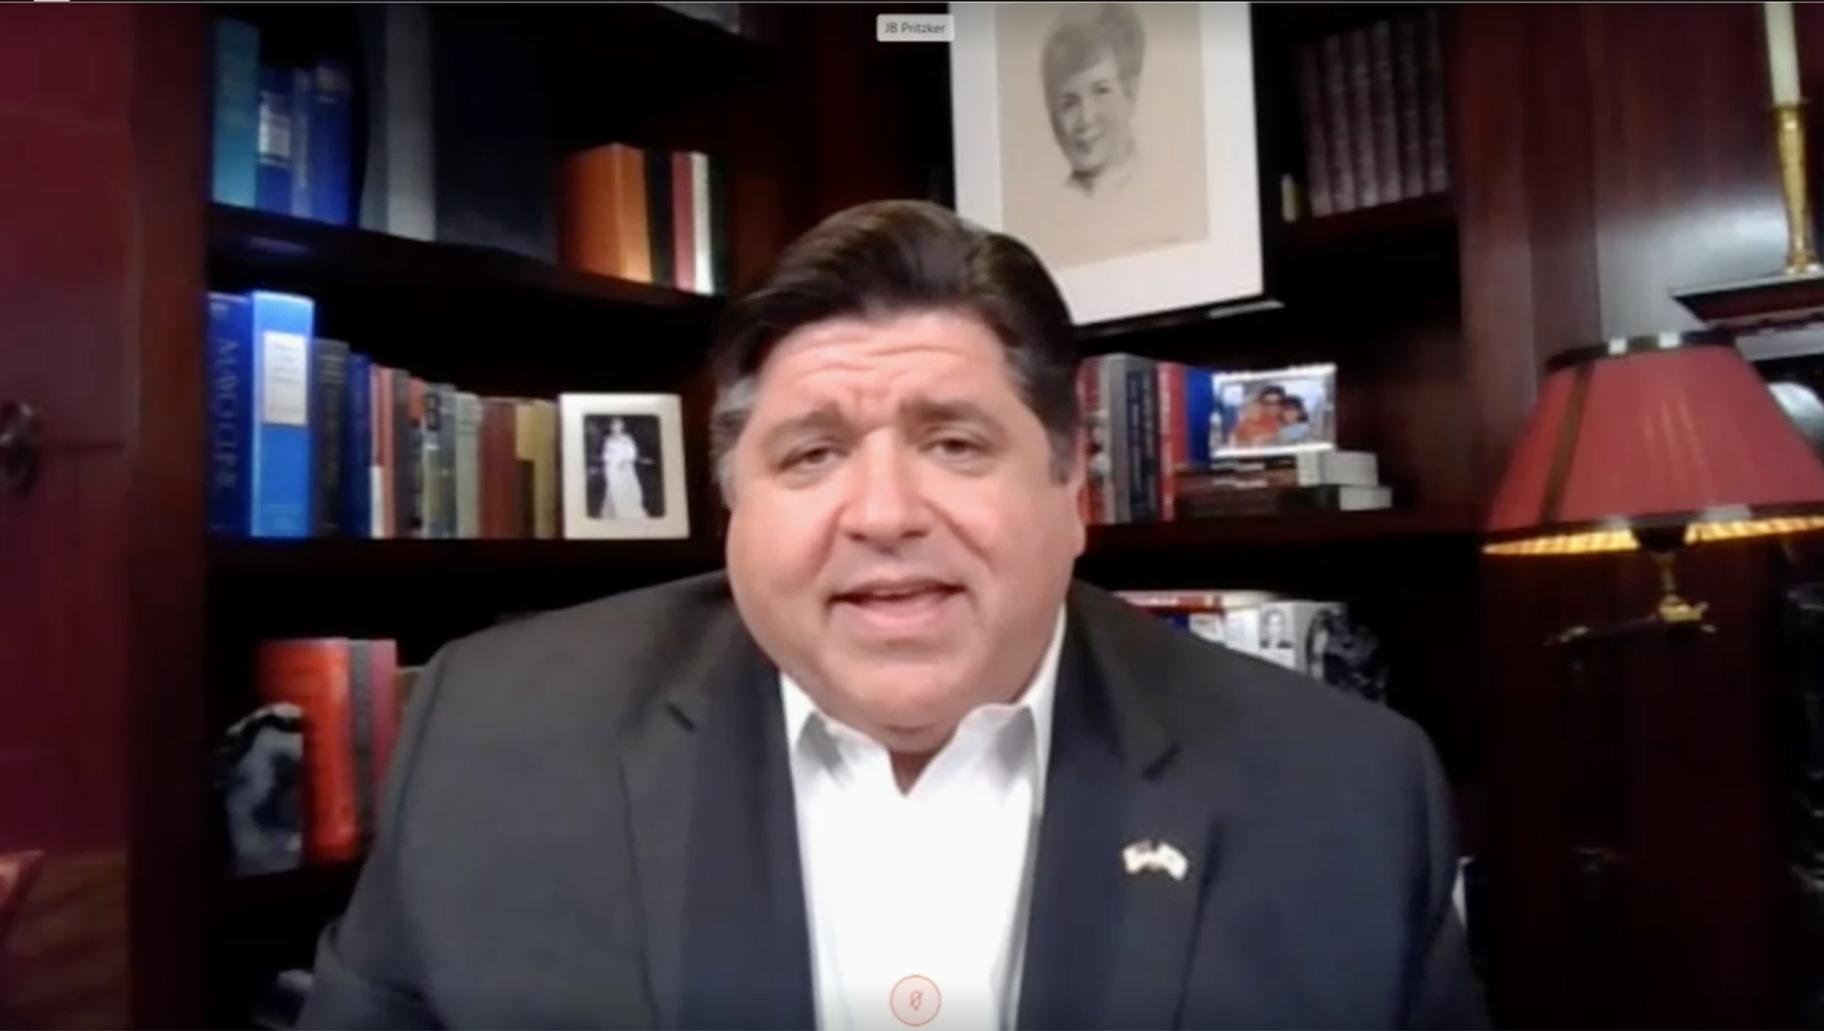 A screenshot shows Illinois Gov. J.B. Pritzker holding a press briefing from his Chicago home on Monday, May 11, 2020. The governor is staying home after senior member of his staff tested positive for the coronavirus.